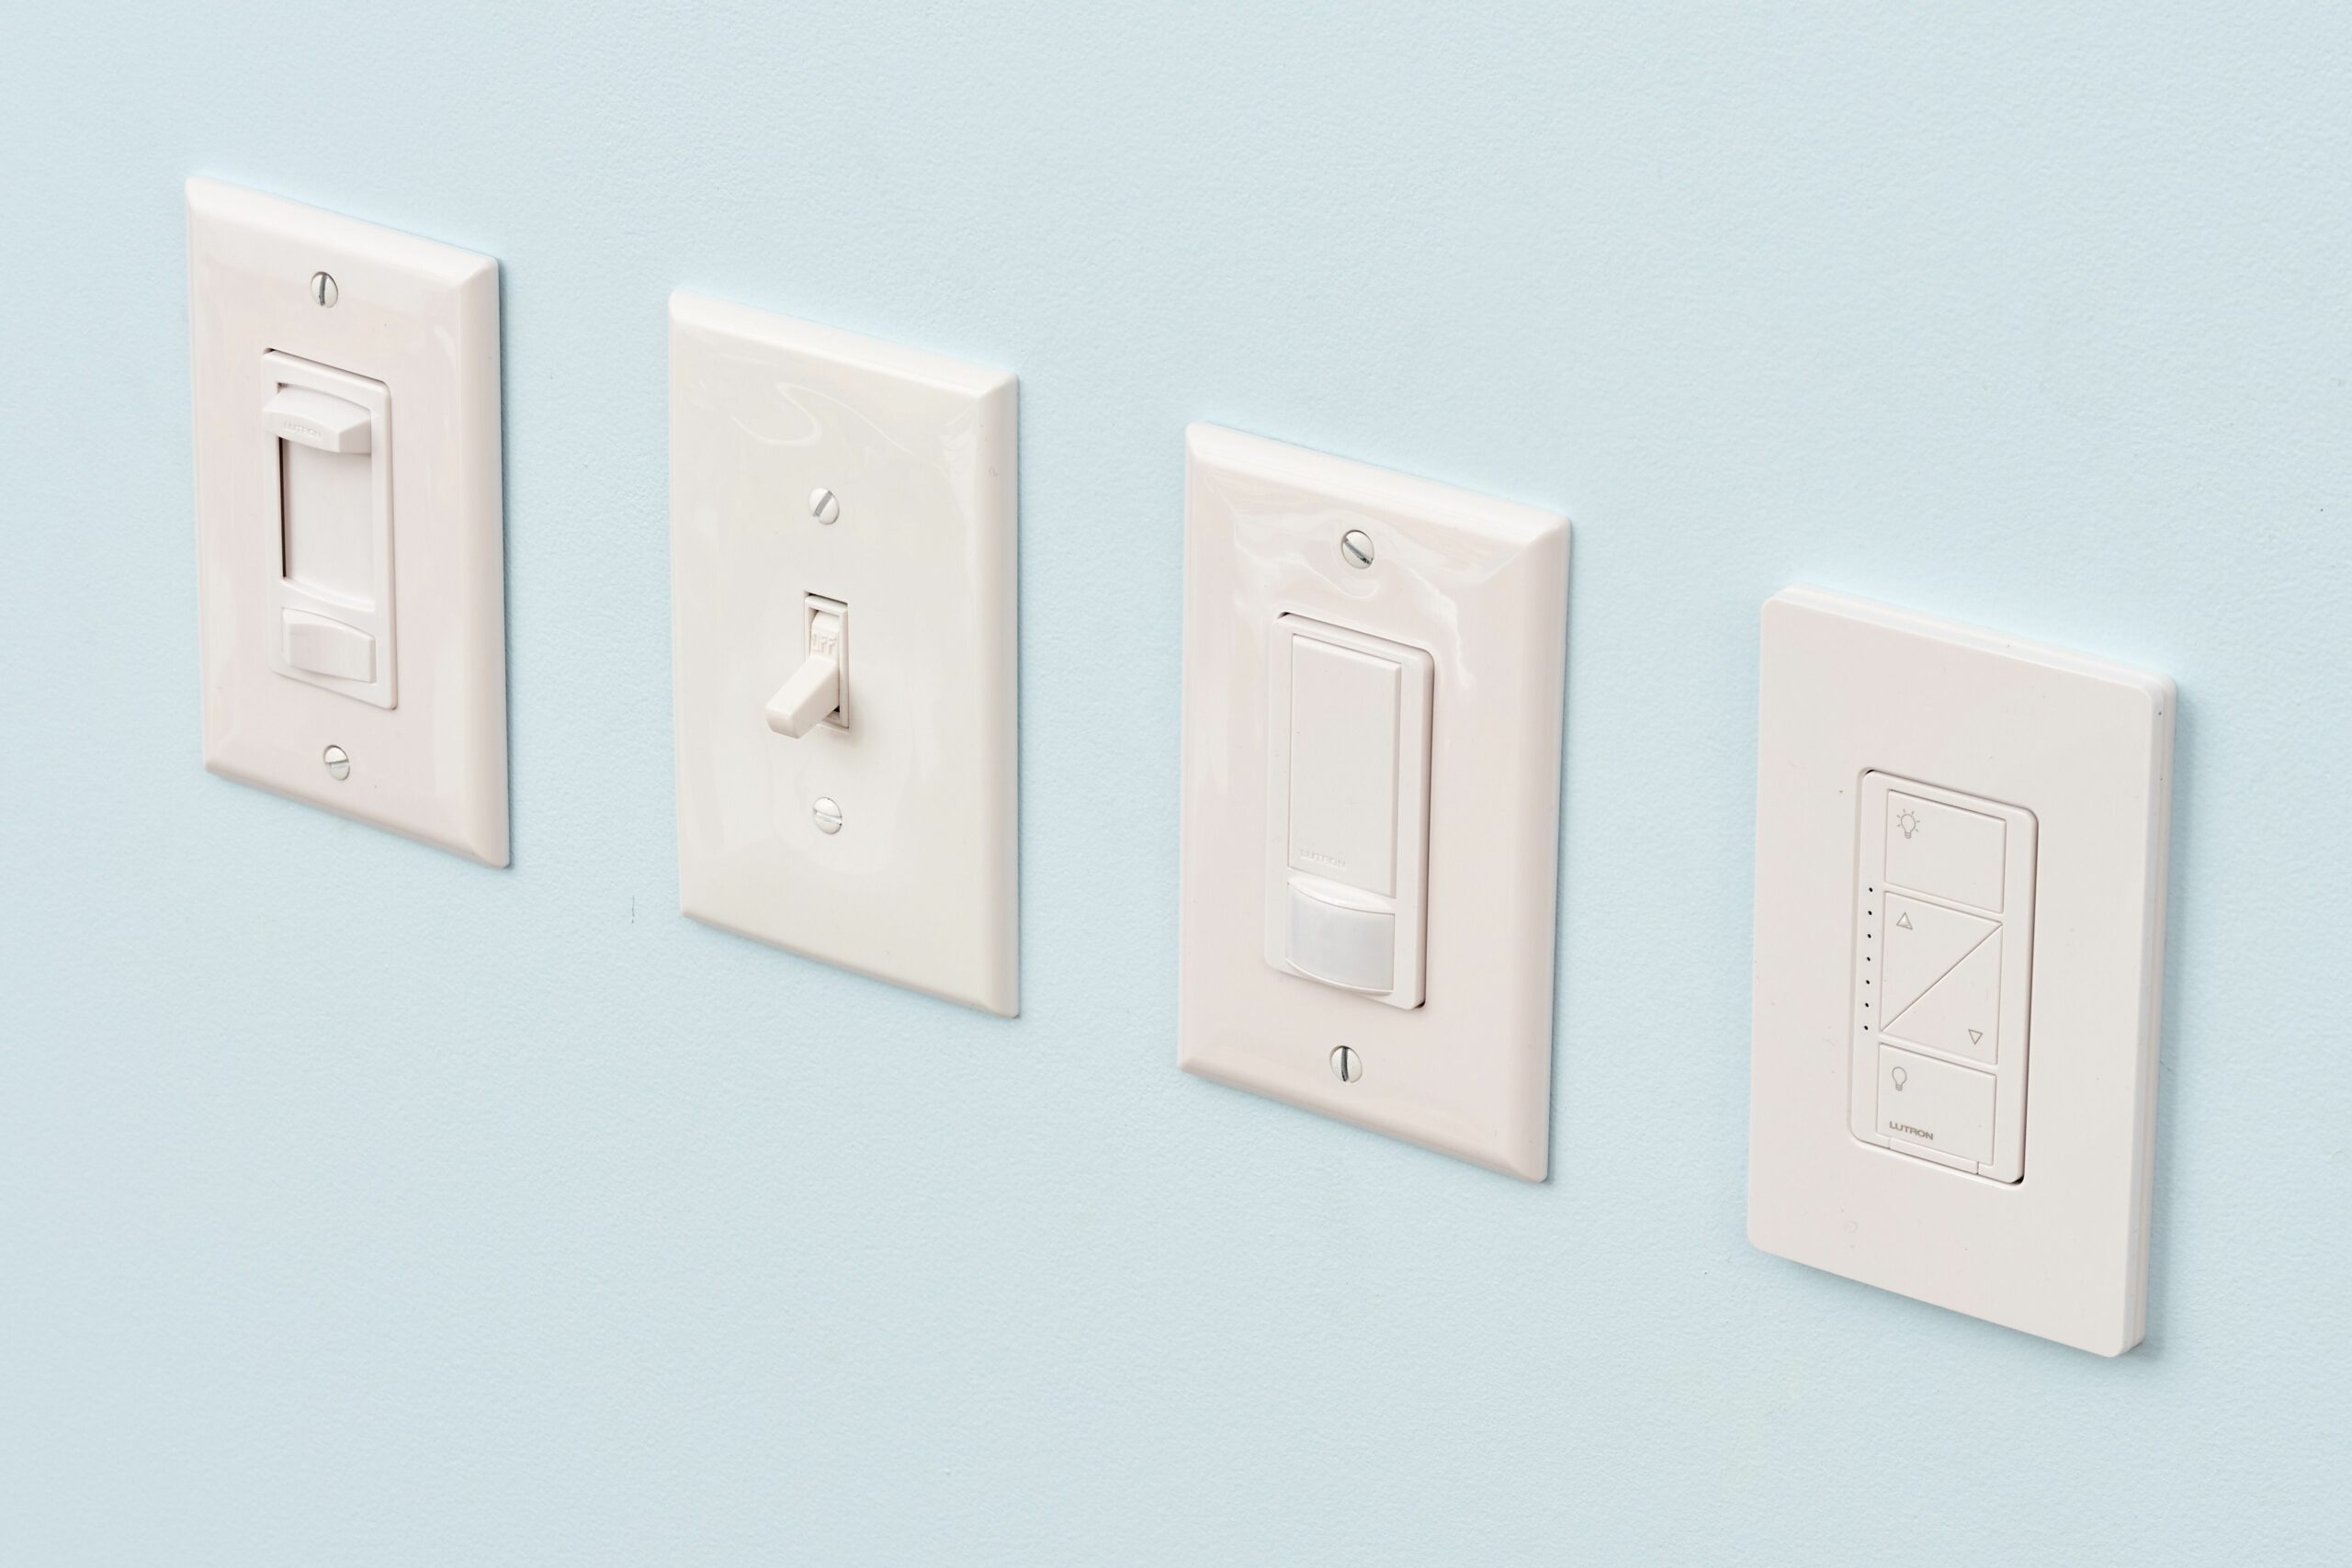 Types of Light Switches: Toggles, Dimmers, & More